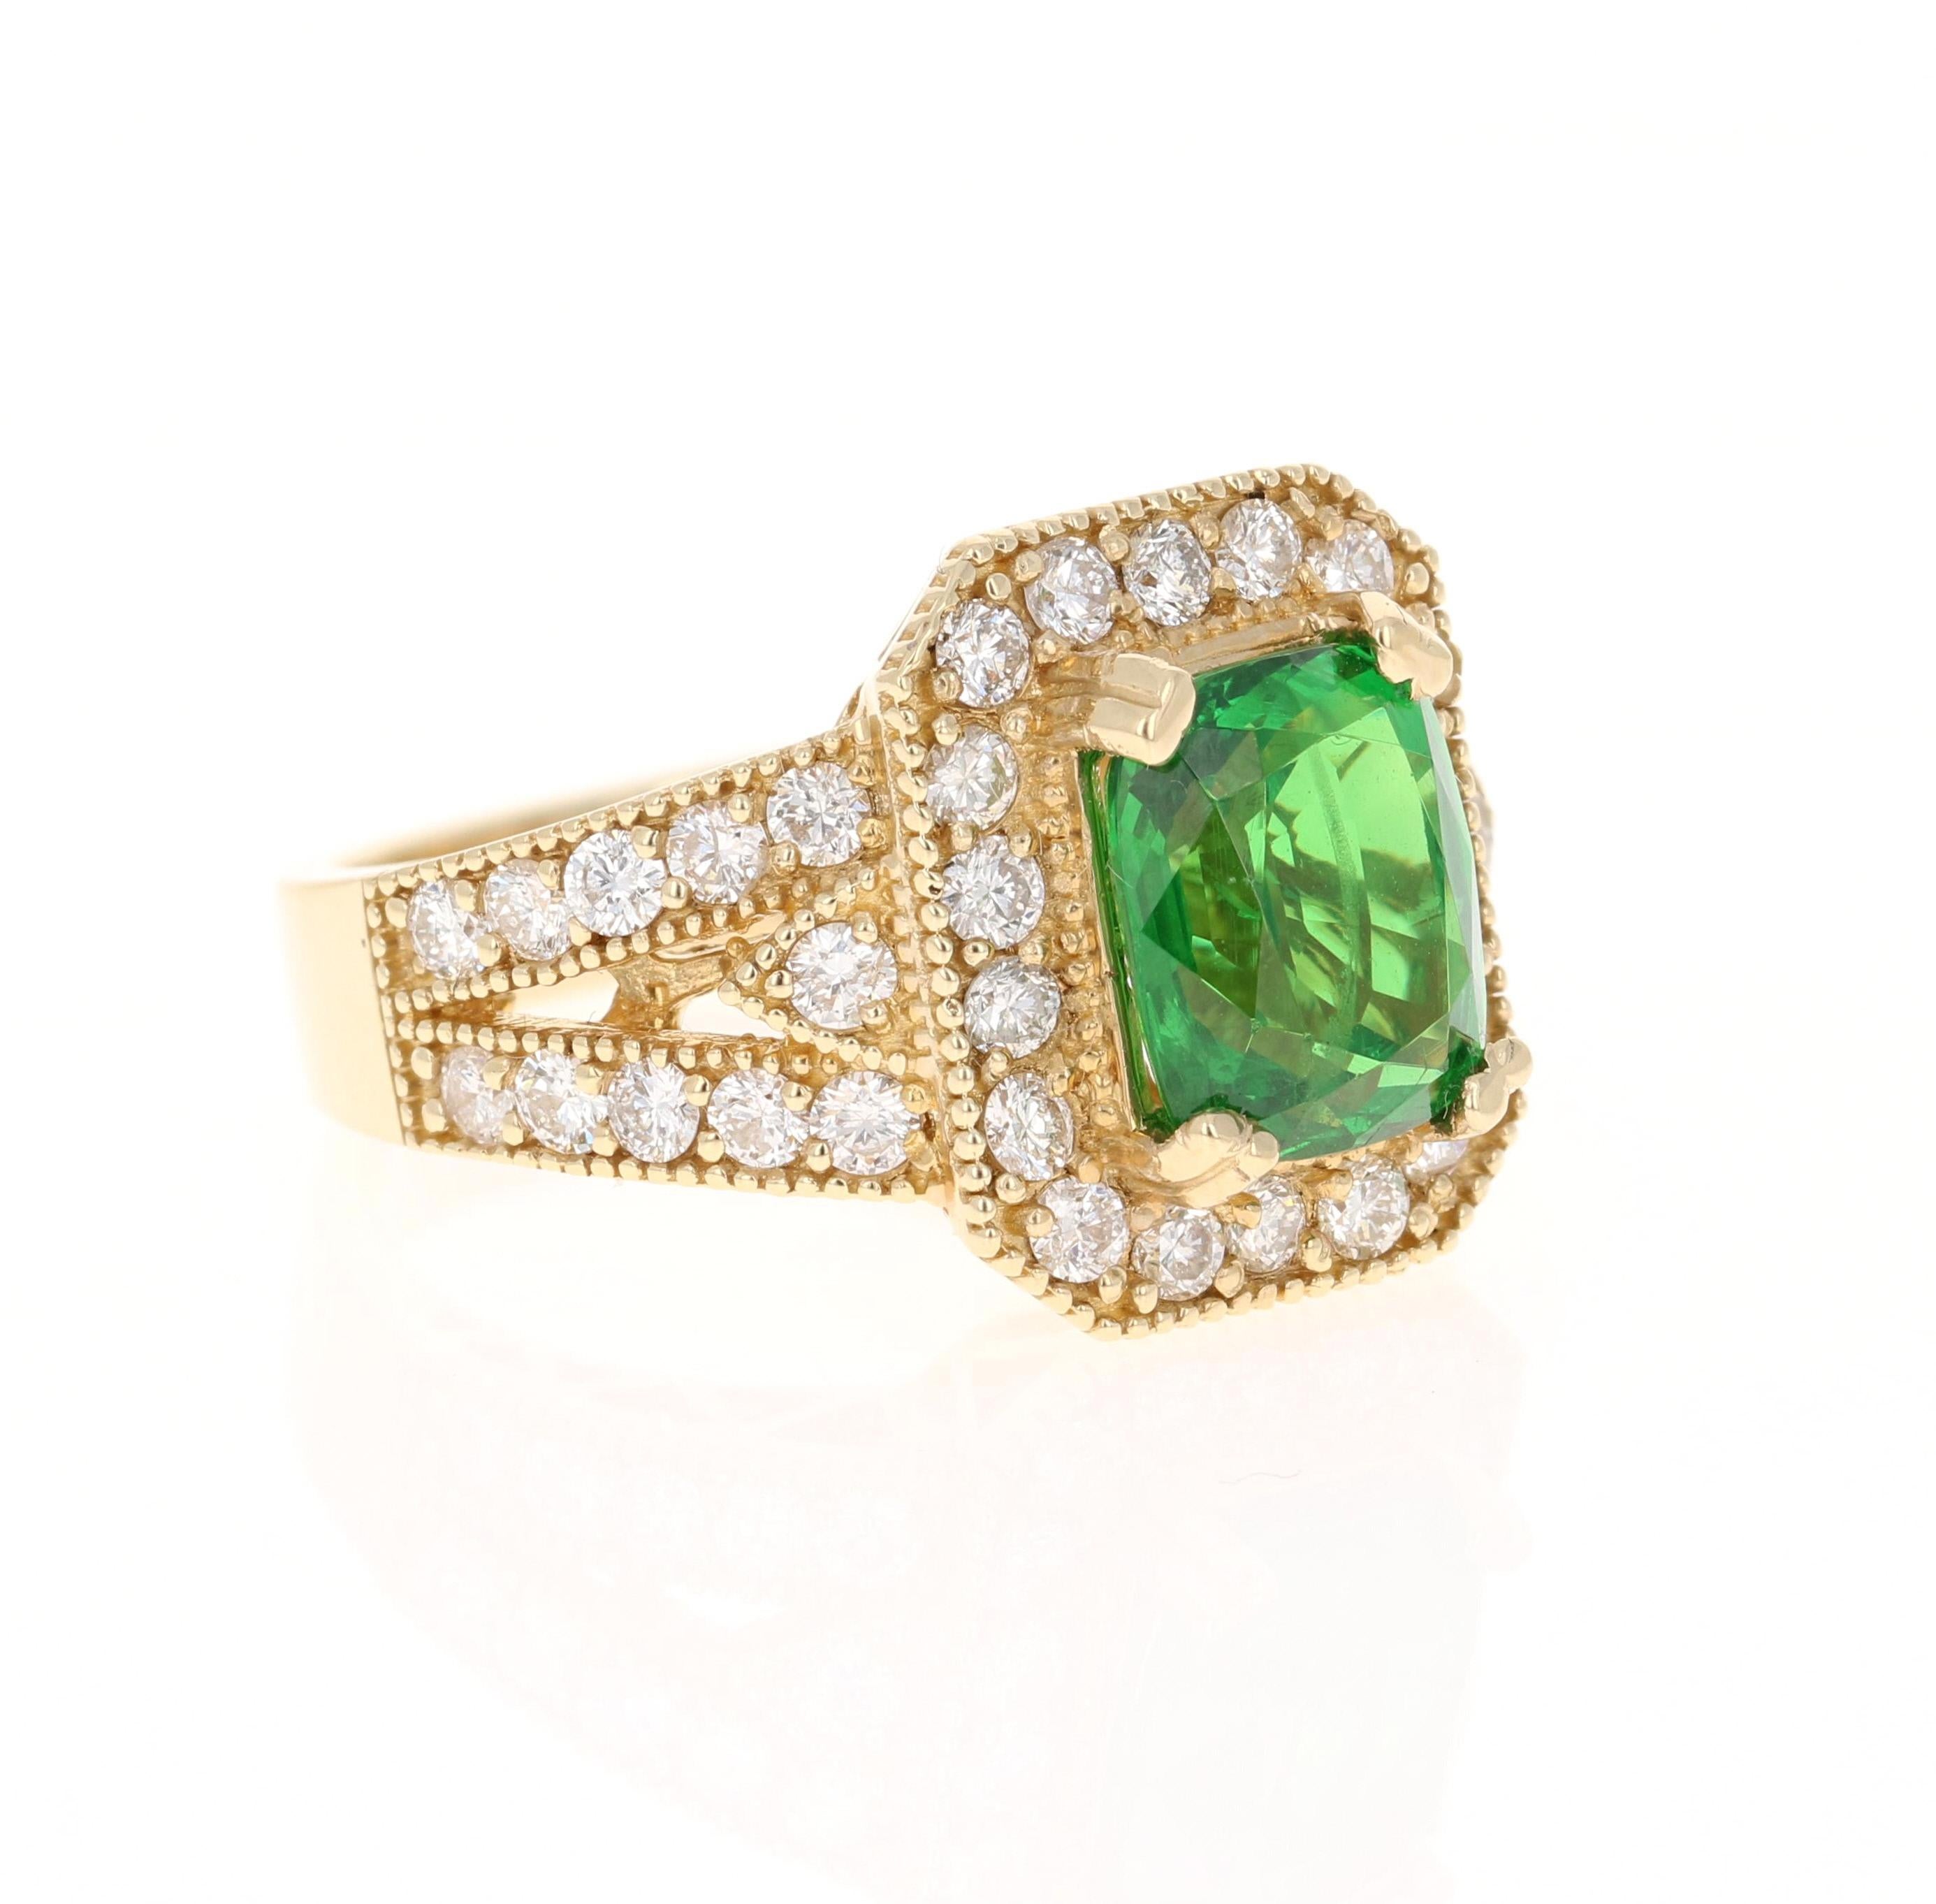 This beautiful ring has a Cushion Cut Tsavorite that is 3.81 Carats and 40 Round Cut Diamonds that weigh 1.38 Carats. (Clarity: VS, Color: F) The total carat weight of the ring is 5.19 Carats. 

Tsavorite is a natural stone that belongs to the